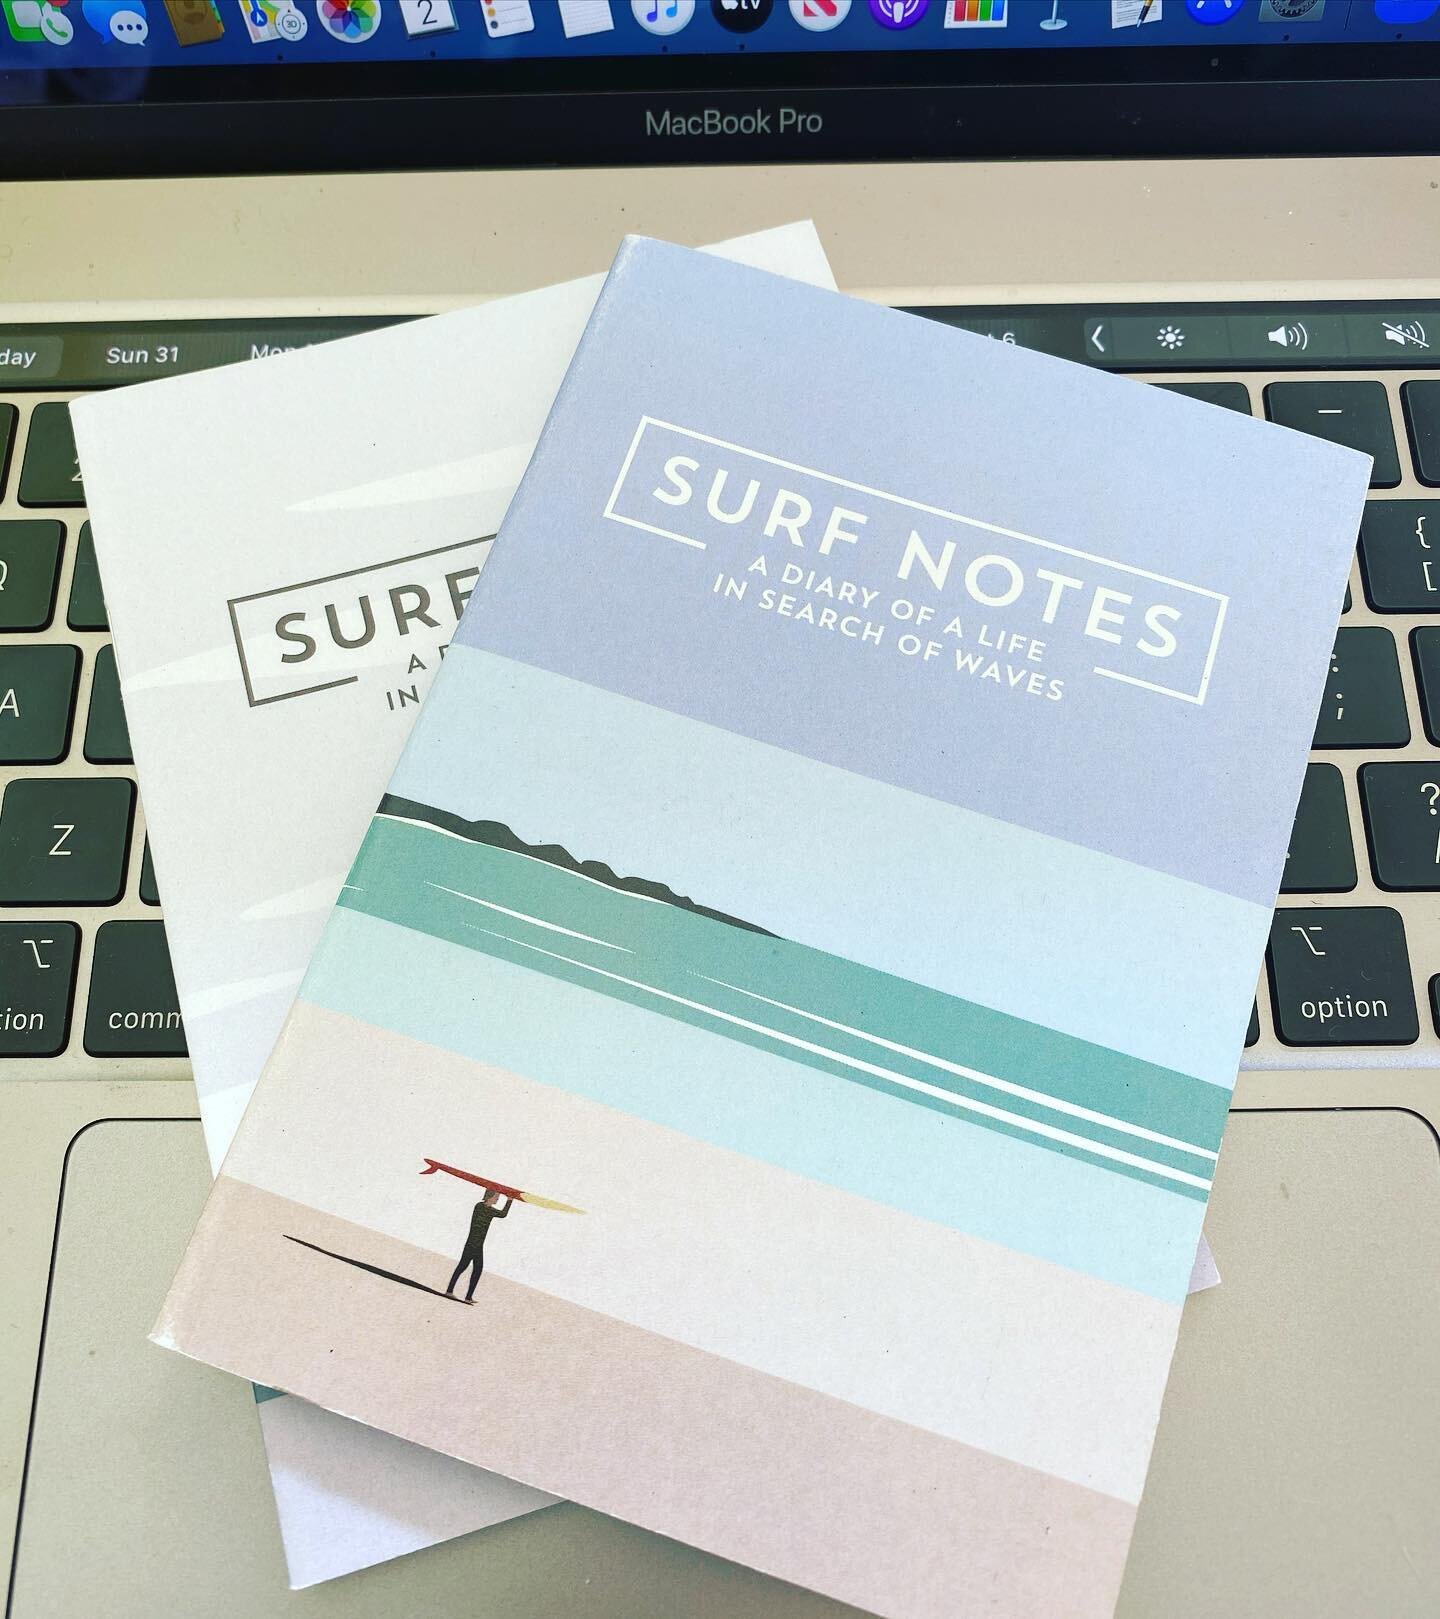 Loving these surf journals! Taking time to notice the rhythms of the ocean 🌊 builds connection and understanding 💡
#bepresent #awareness #goals
.
.
.
#greenwavesurf #surfcoaching #outdoorsports #naturalrhythms #swells #tides #forcasting #nearshoref